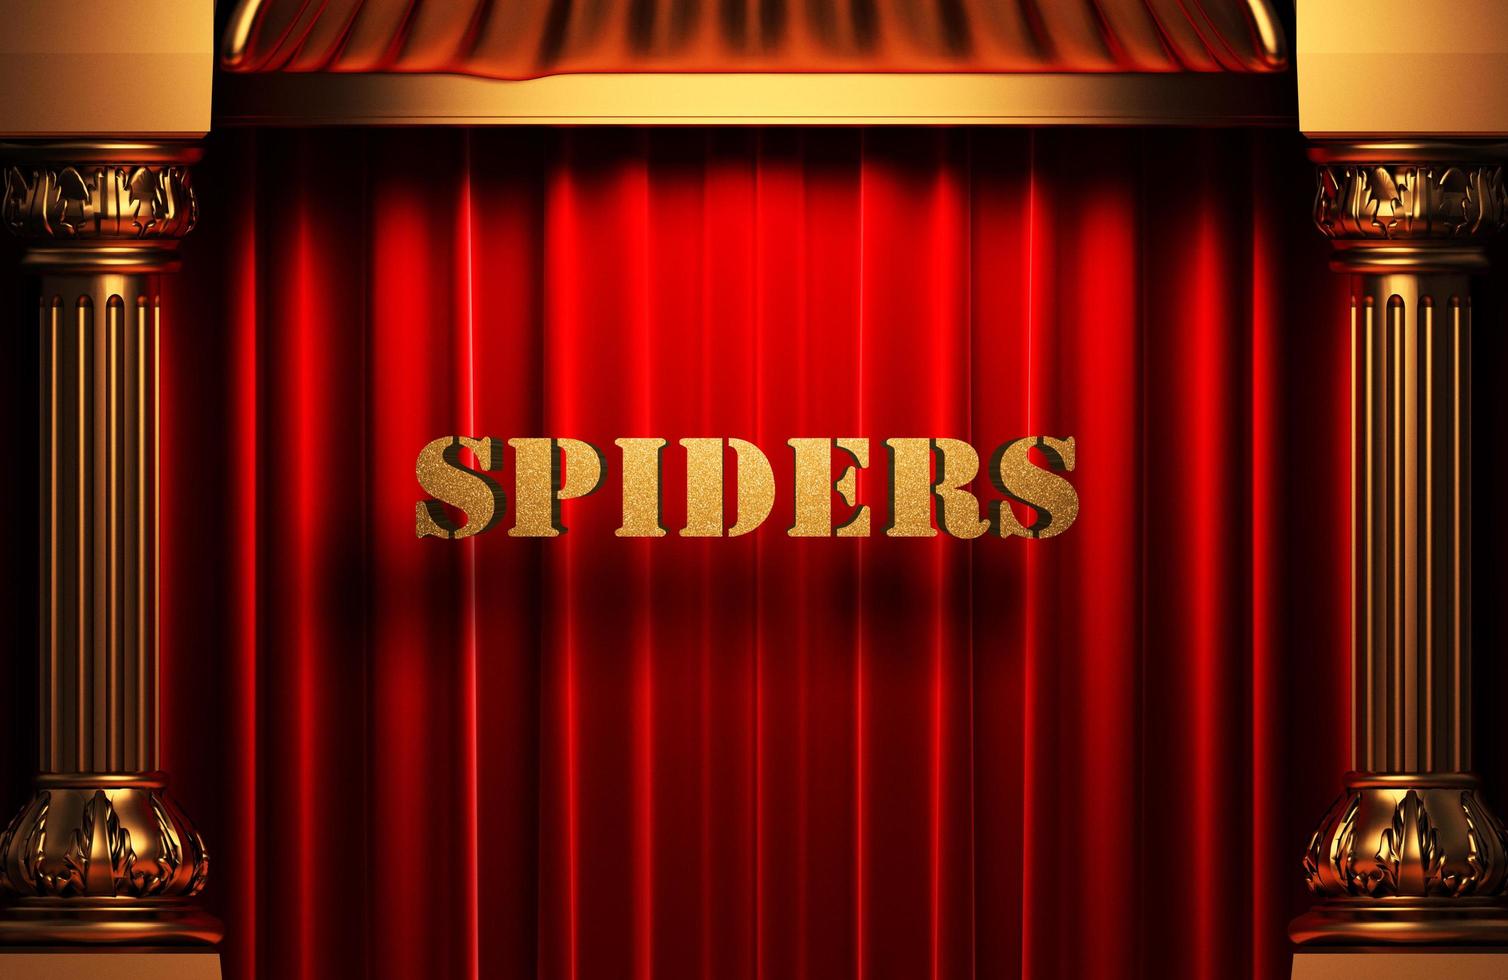 spiders golden word on red curtain photo